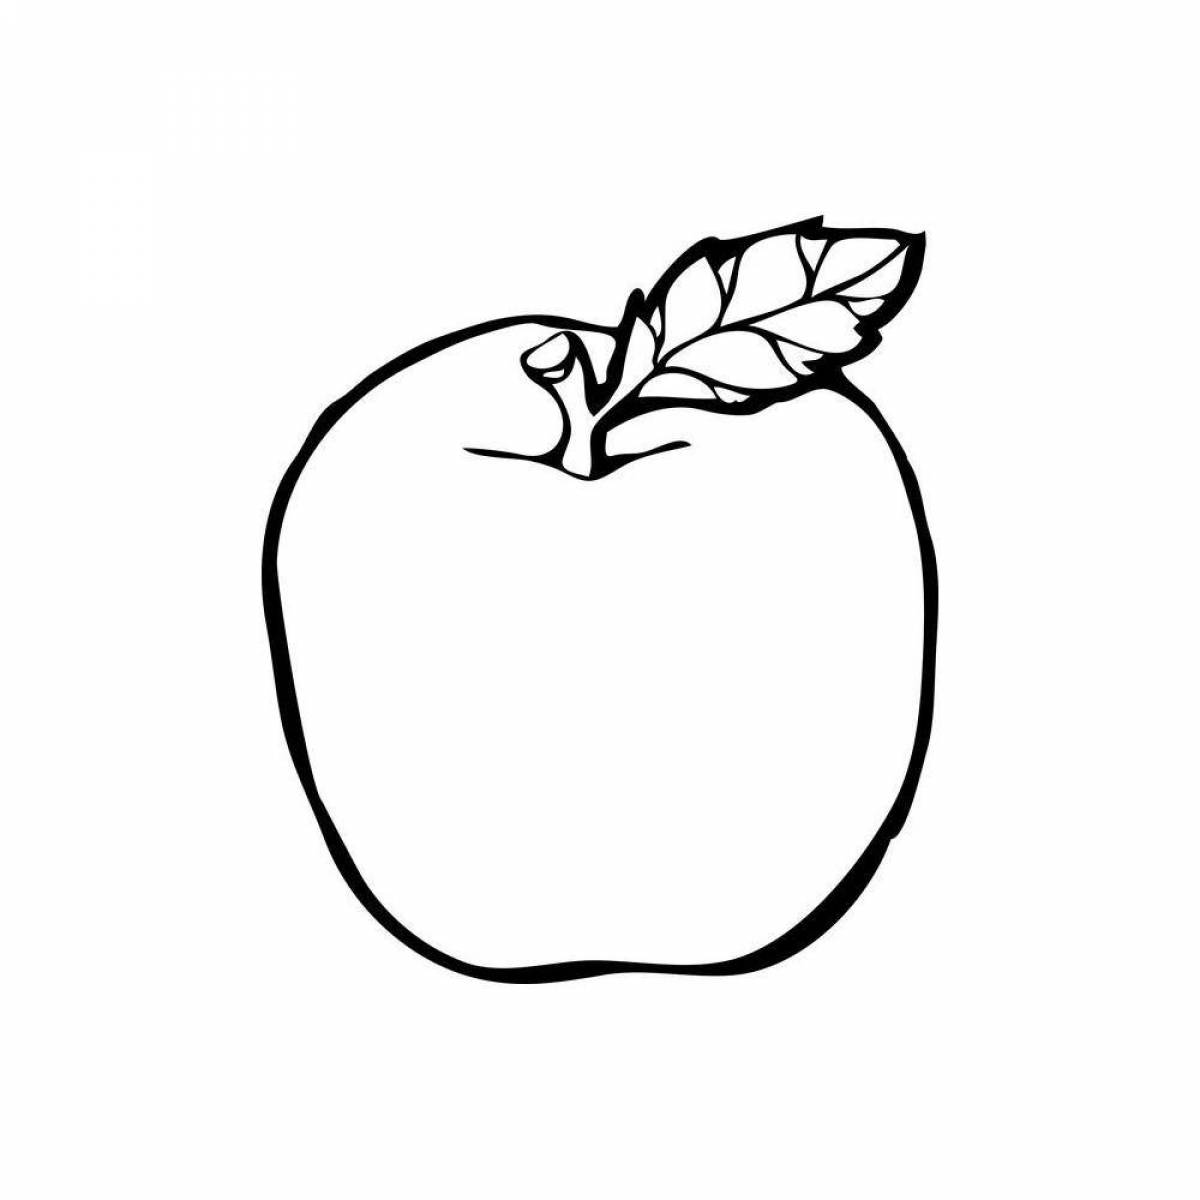 Adorable apple coloring book for 3-4 year olds